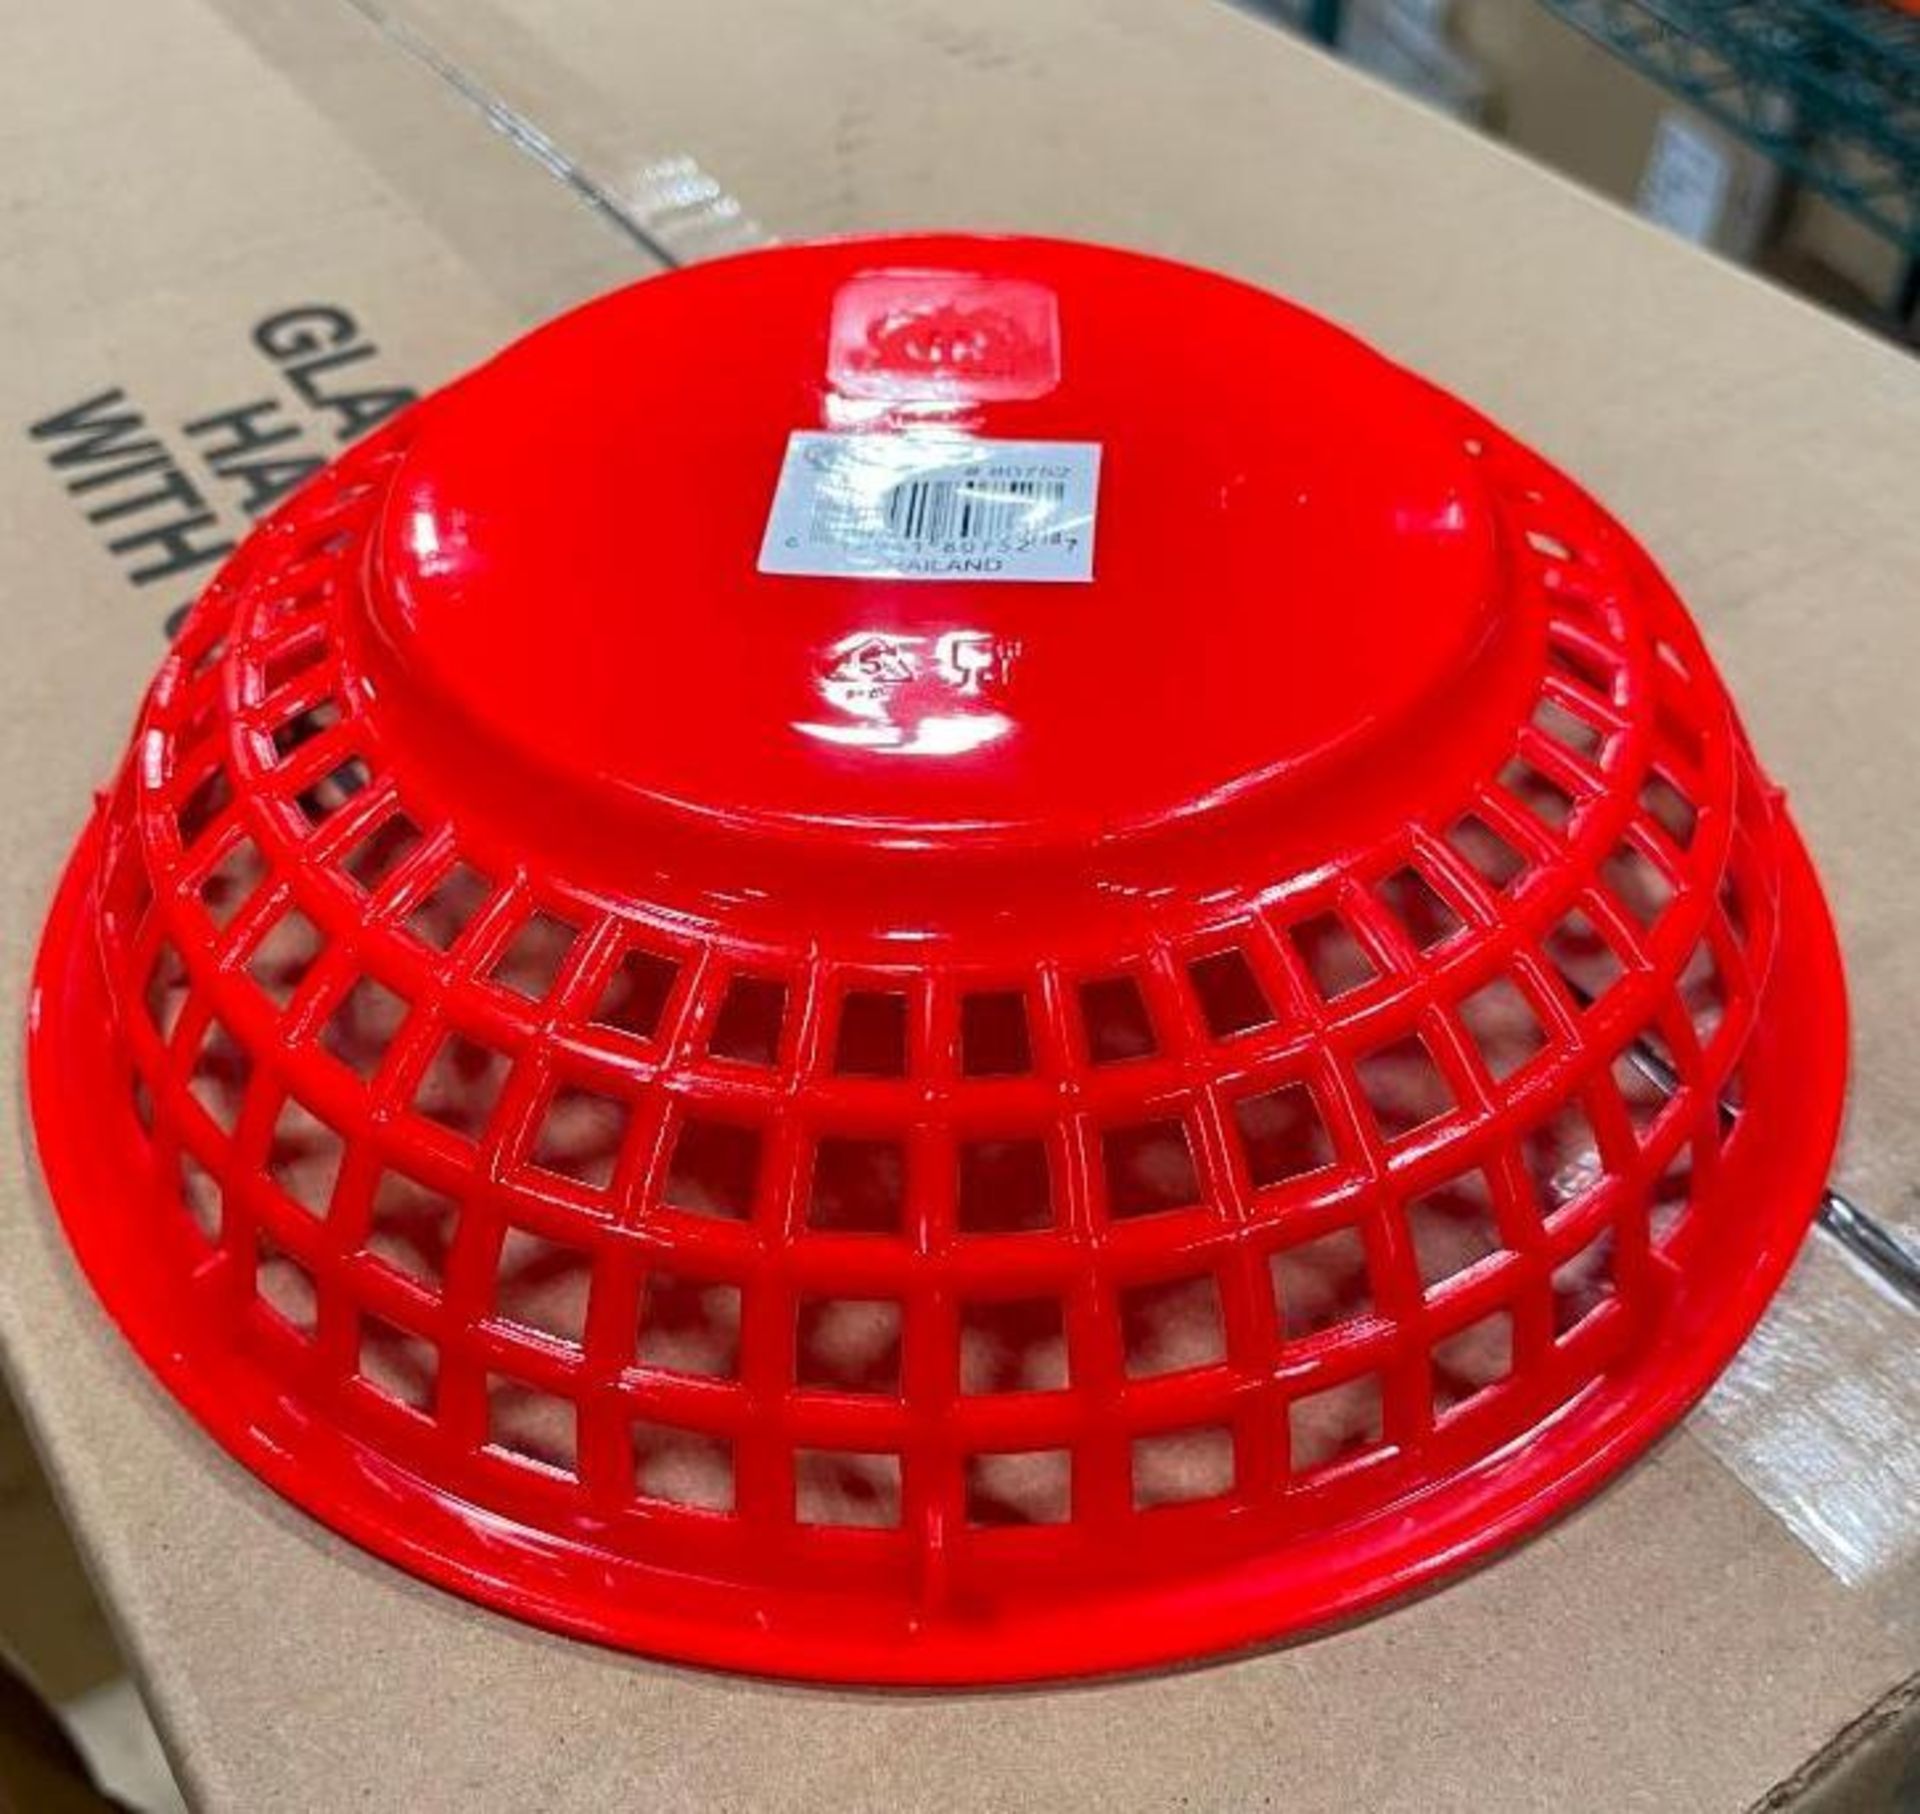 8" RED ROUND PLASTIC FOOD BASKET, JOHNSON ROSE 80752 - LOT OF 108 - NEW - Image 3 of 4